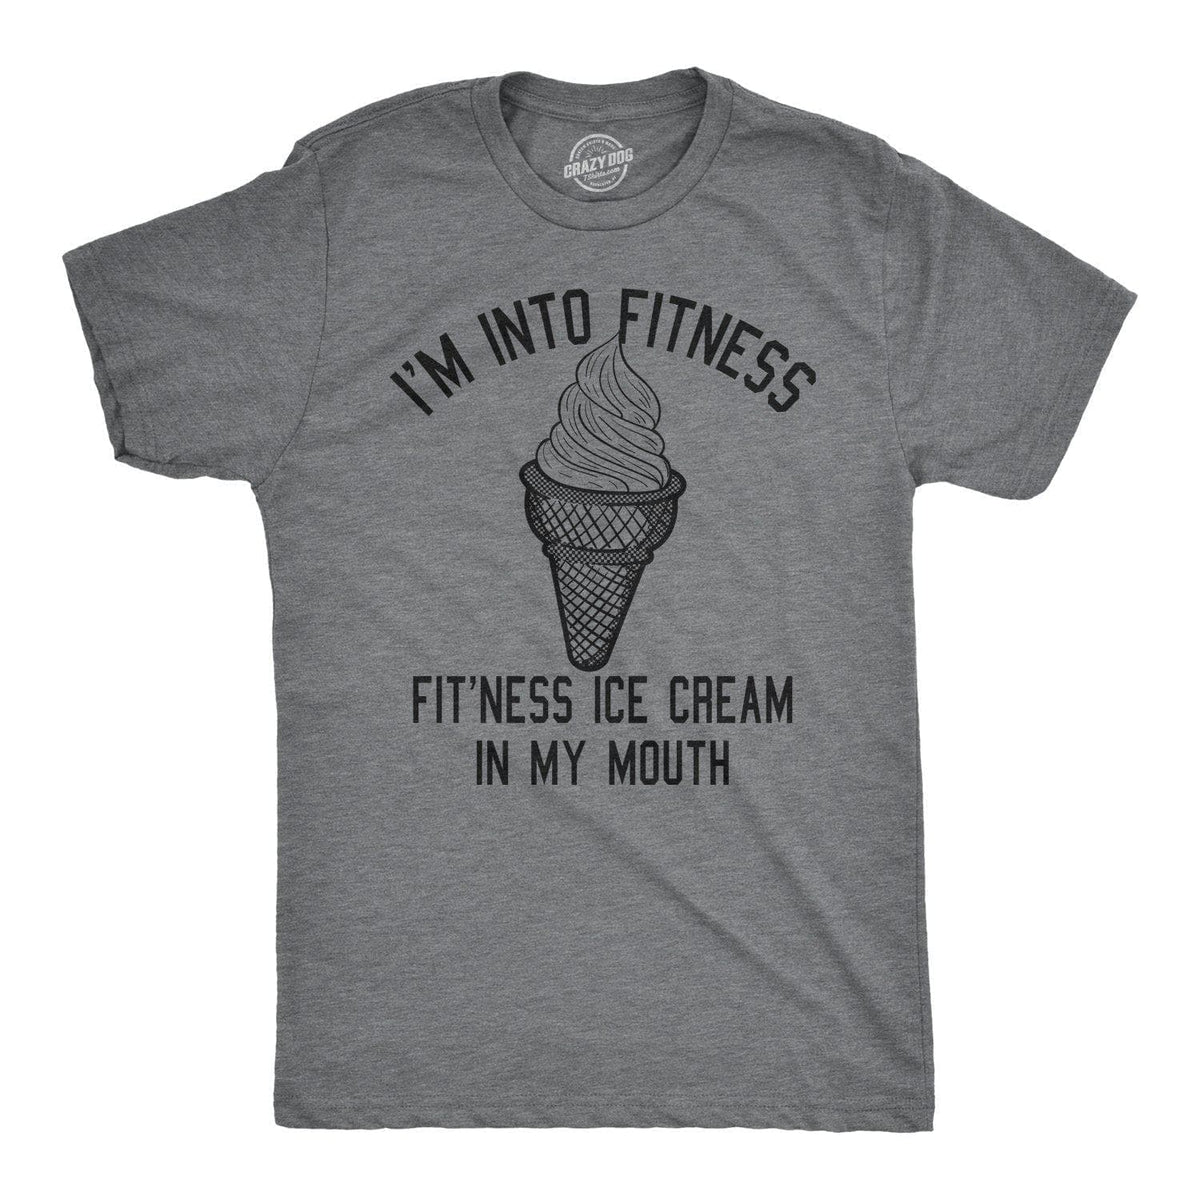 Fitness Ice Cream In My Mouth Men's T Shirt - Crazy Dog T-Shirts